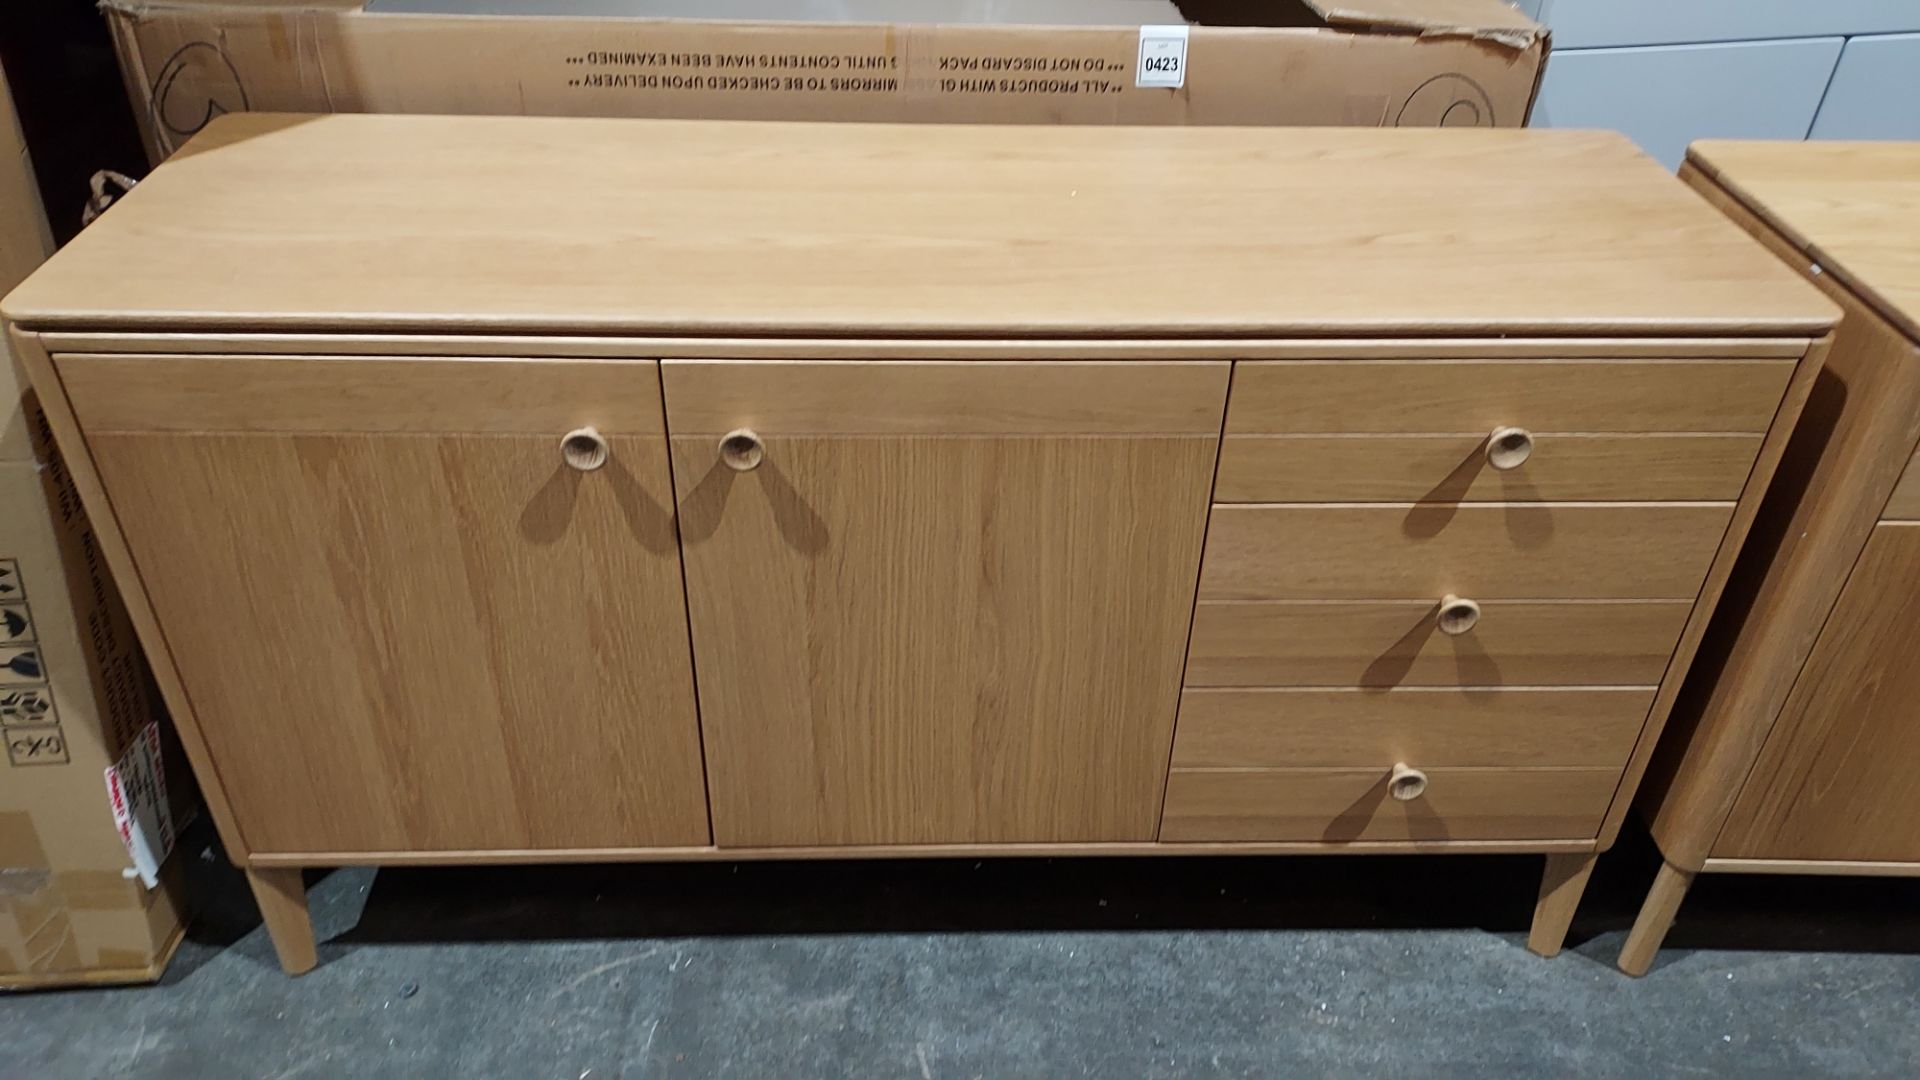 1 X HADLEY SIDEBOARD LARGE WITH 3 DRAWERS 2 DOORS - IN NATURAL OAK 1464 X 470 X 676 MM ( PLEASE NOTE